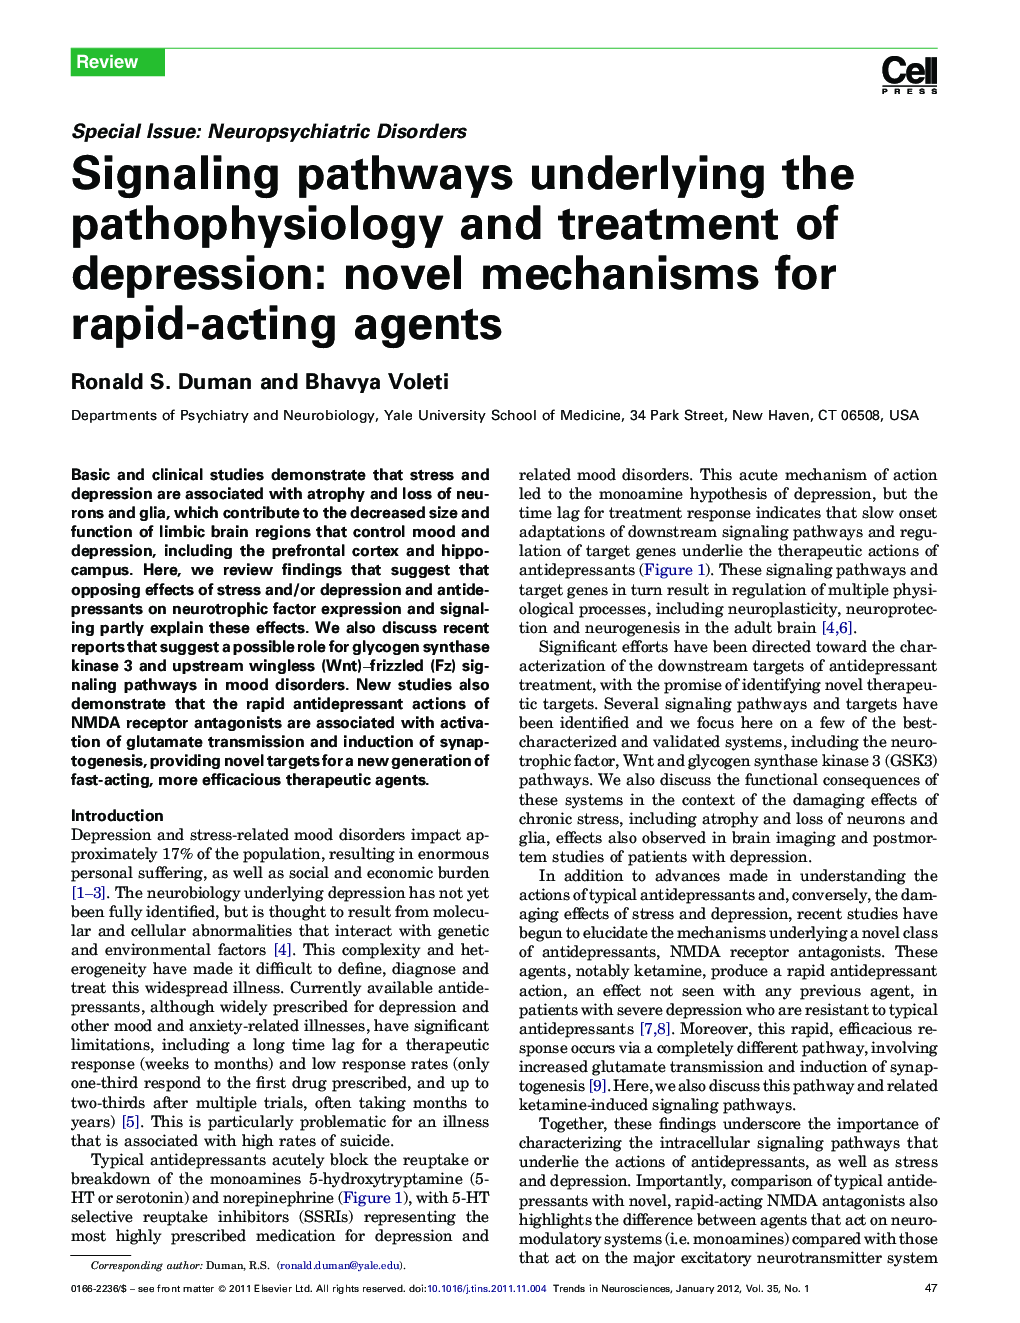 Signaling pathways underlying the pathophysiology and treatment of depression: novel mechanisms for rapid-acting agents